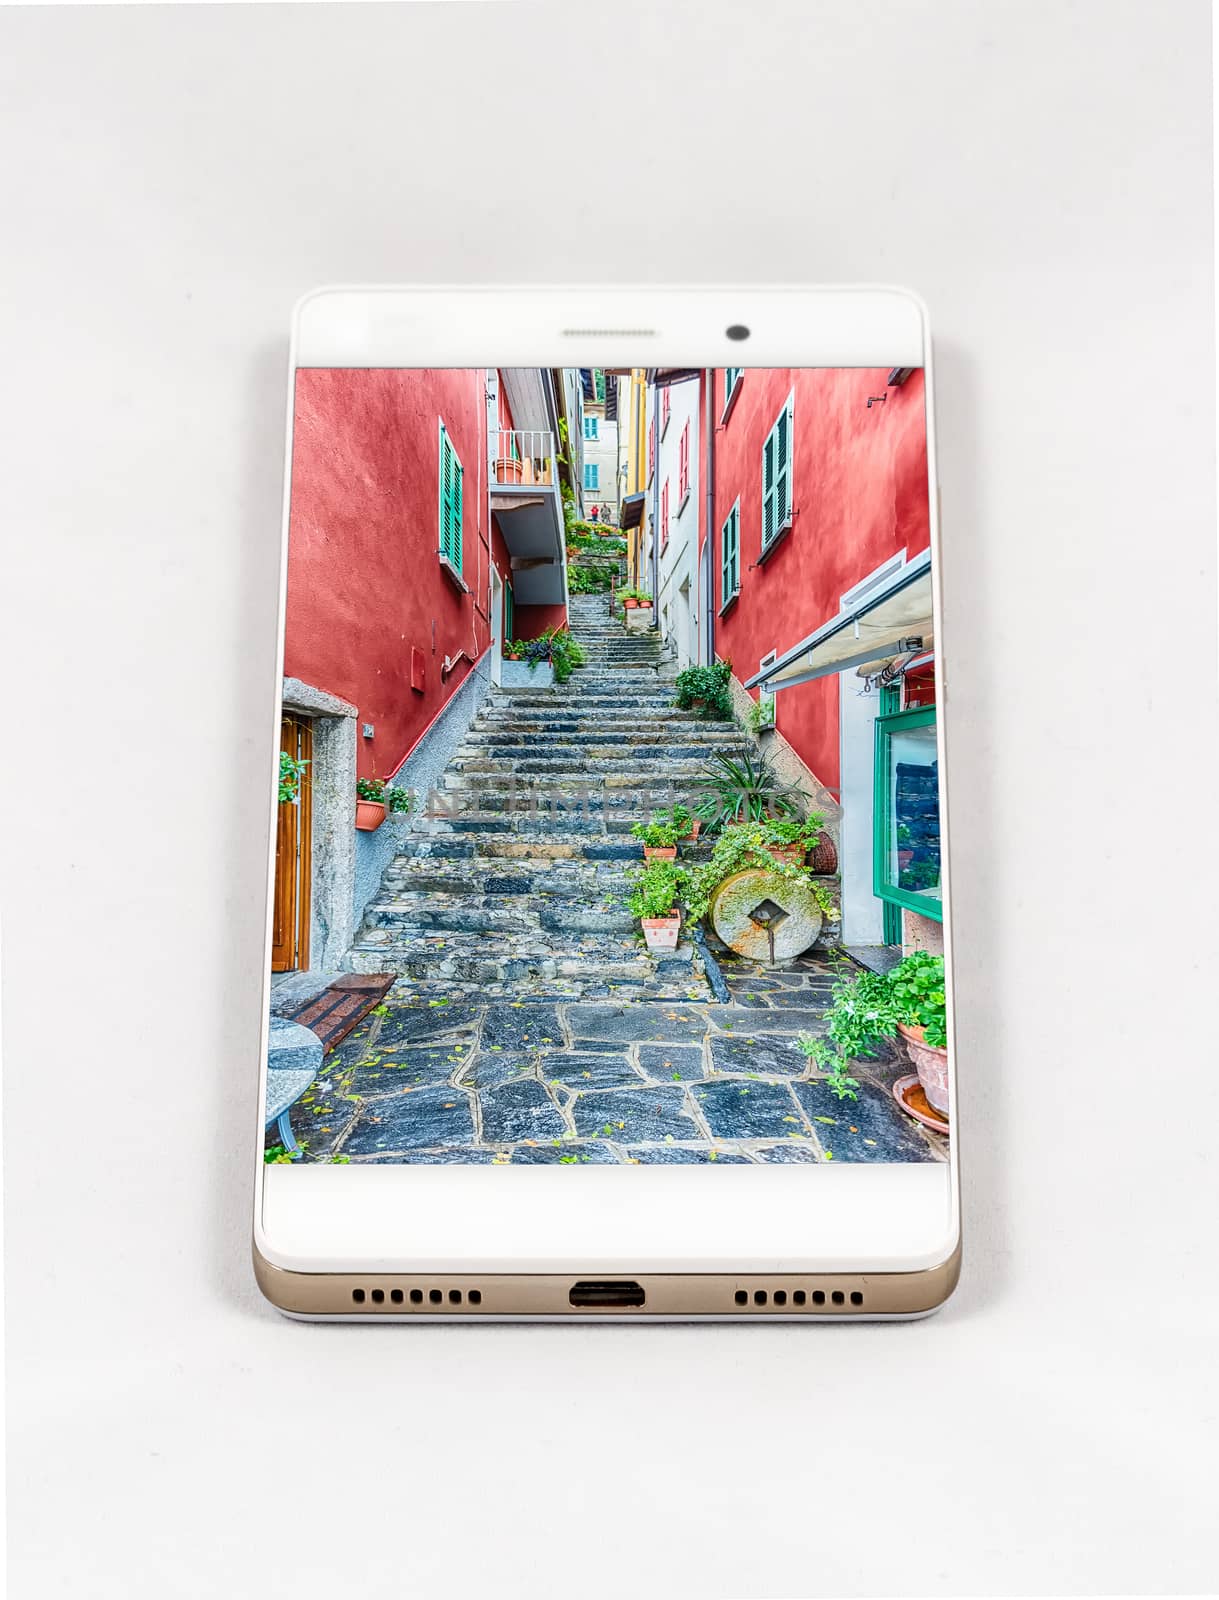 Modern smartphone with full screen picture of Varenna, Lake Como, Italy. Concept for travel smartphone photography. All images in this composition are made by me and separately available on my portfolio